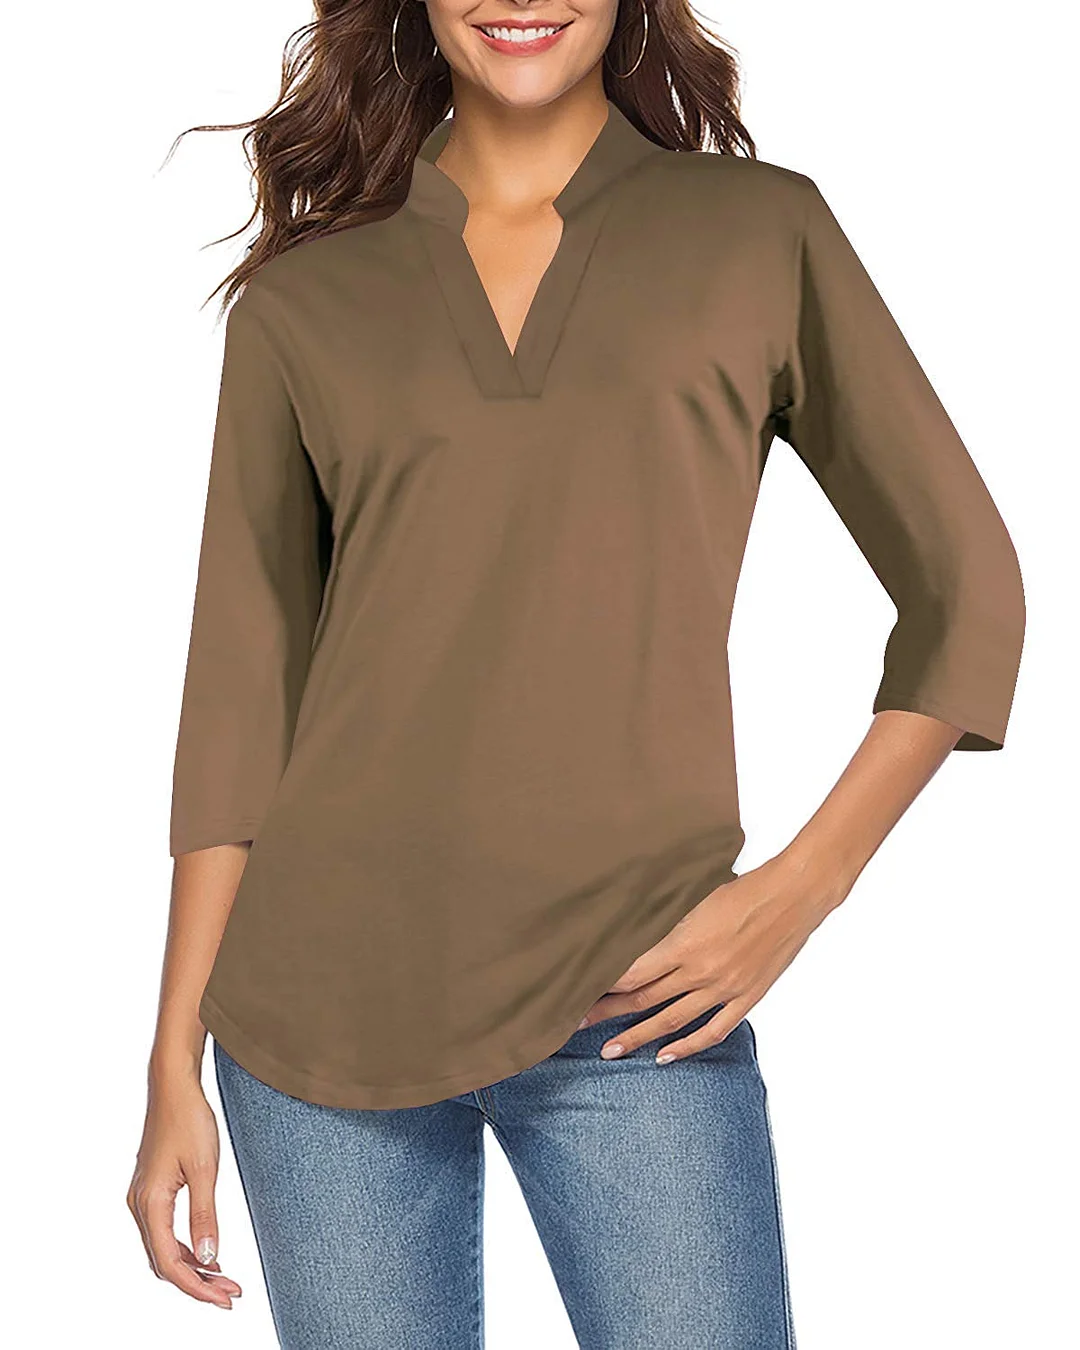 Women's 3/4 Sleeve V Neck Tops Casual Tunic Blouse Loose Shirt